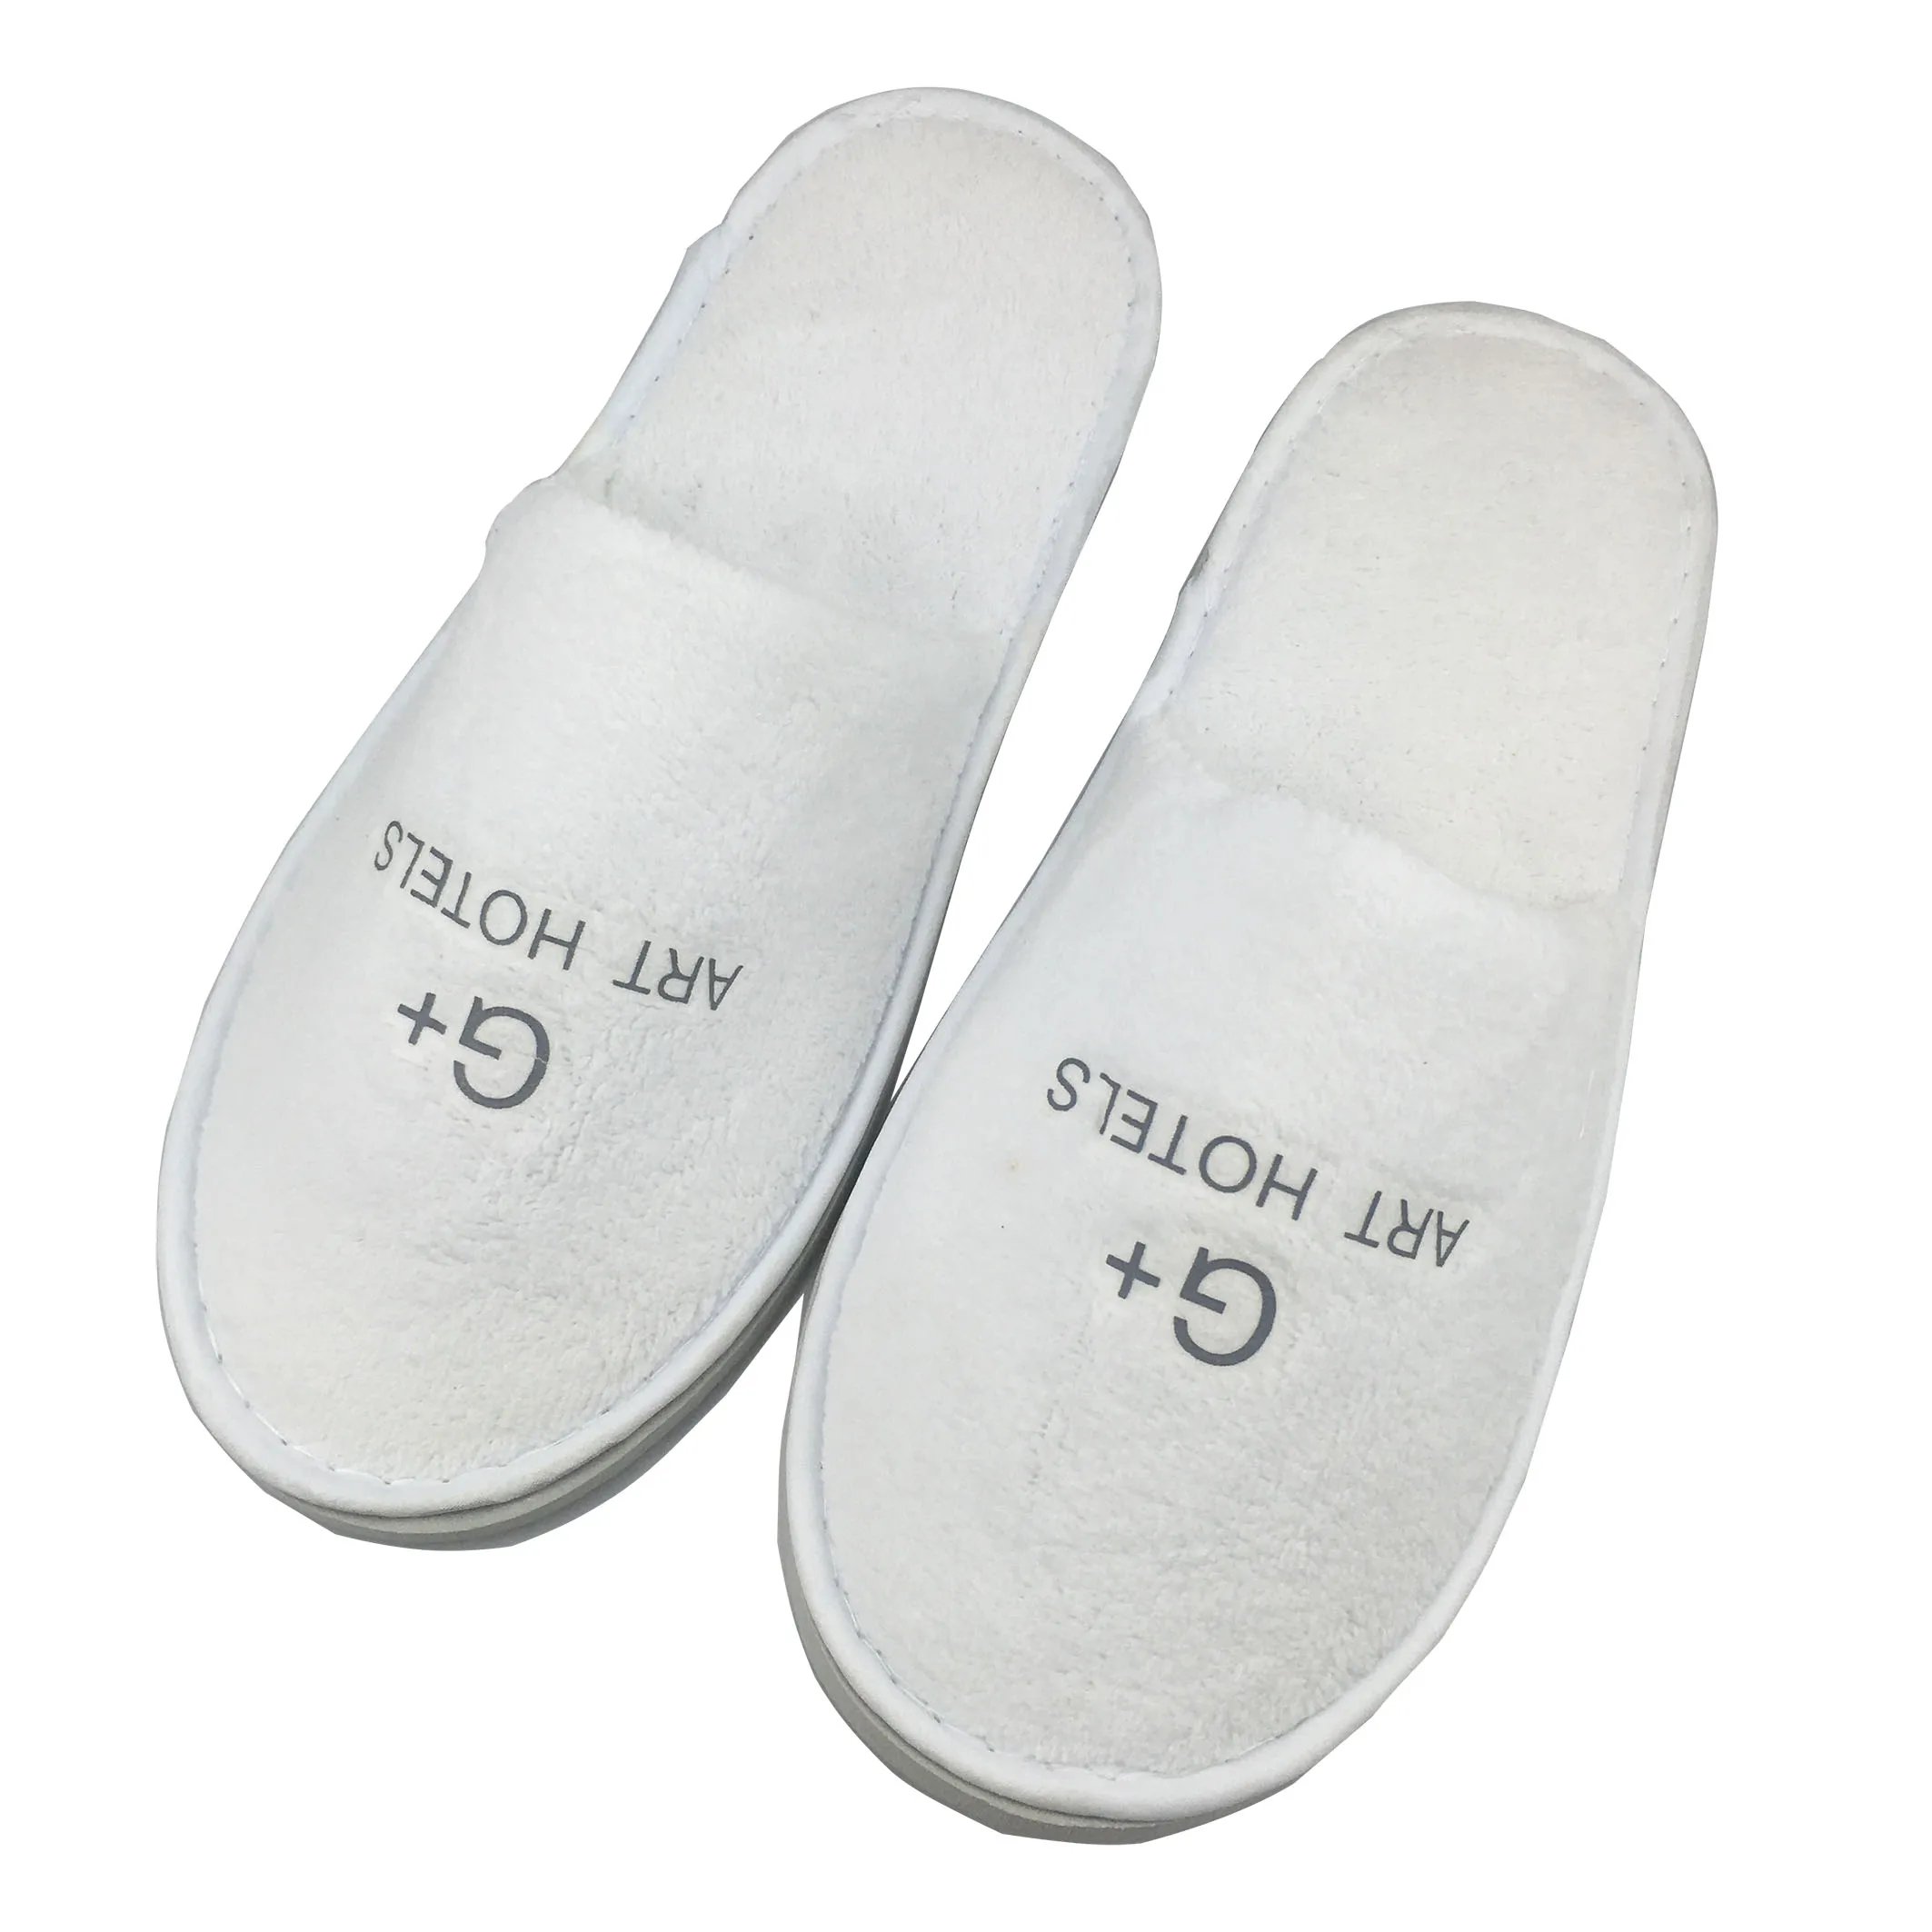 badminton Fancy Array af Wholesale Disposable Customized Hotel Slippers - Buy Hotel Slippers,Hotel  Slippers,Hotel Slippers Product on Alibaba.com